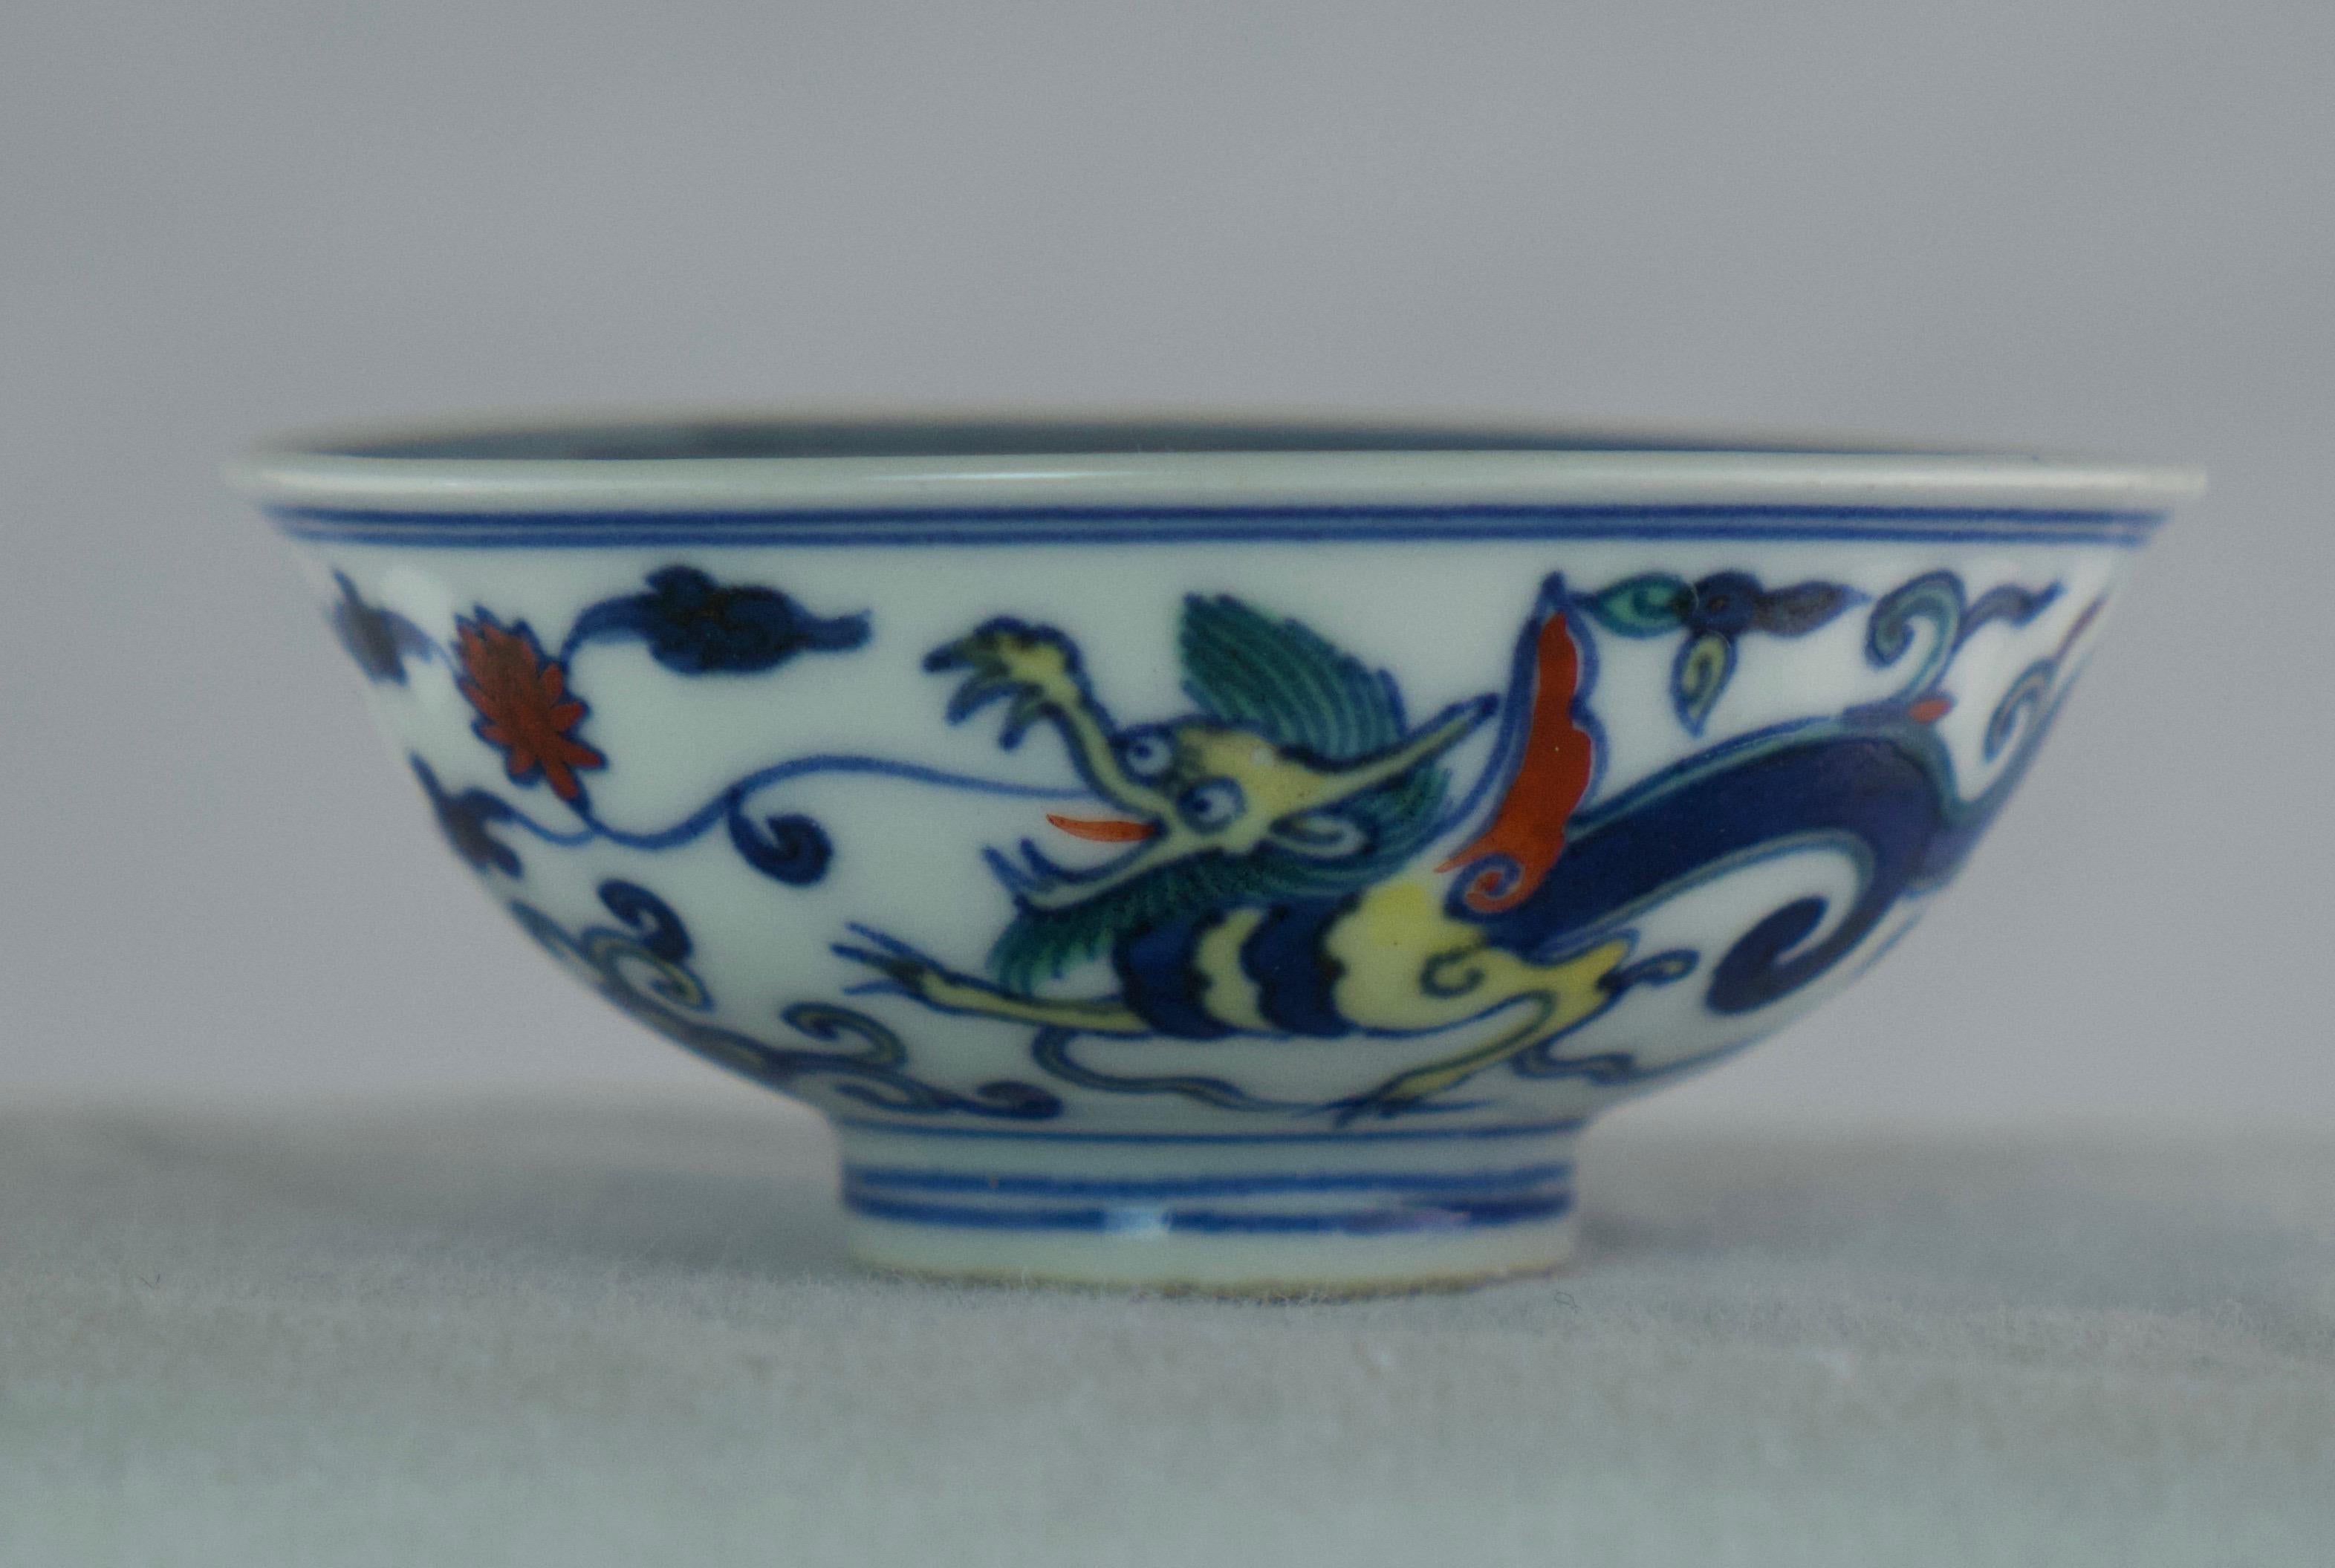 A small Chinese cup with painted decorations of a dragon in mostly blue colours. Marked underneath.